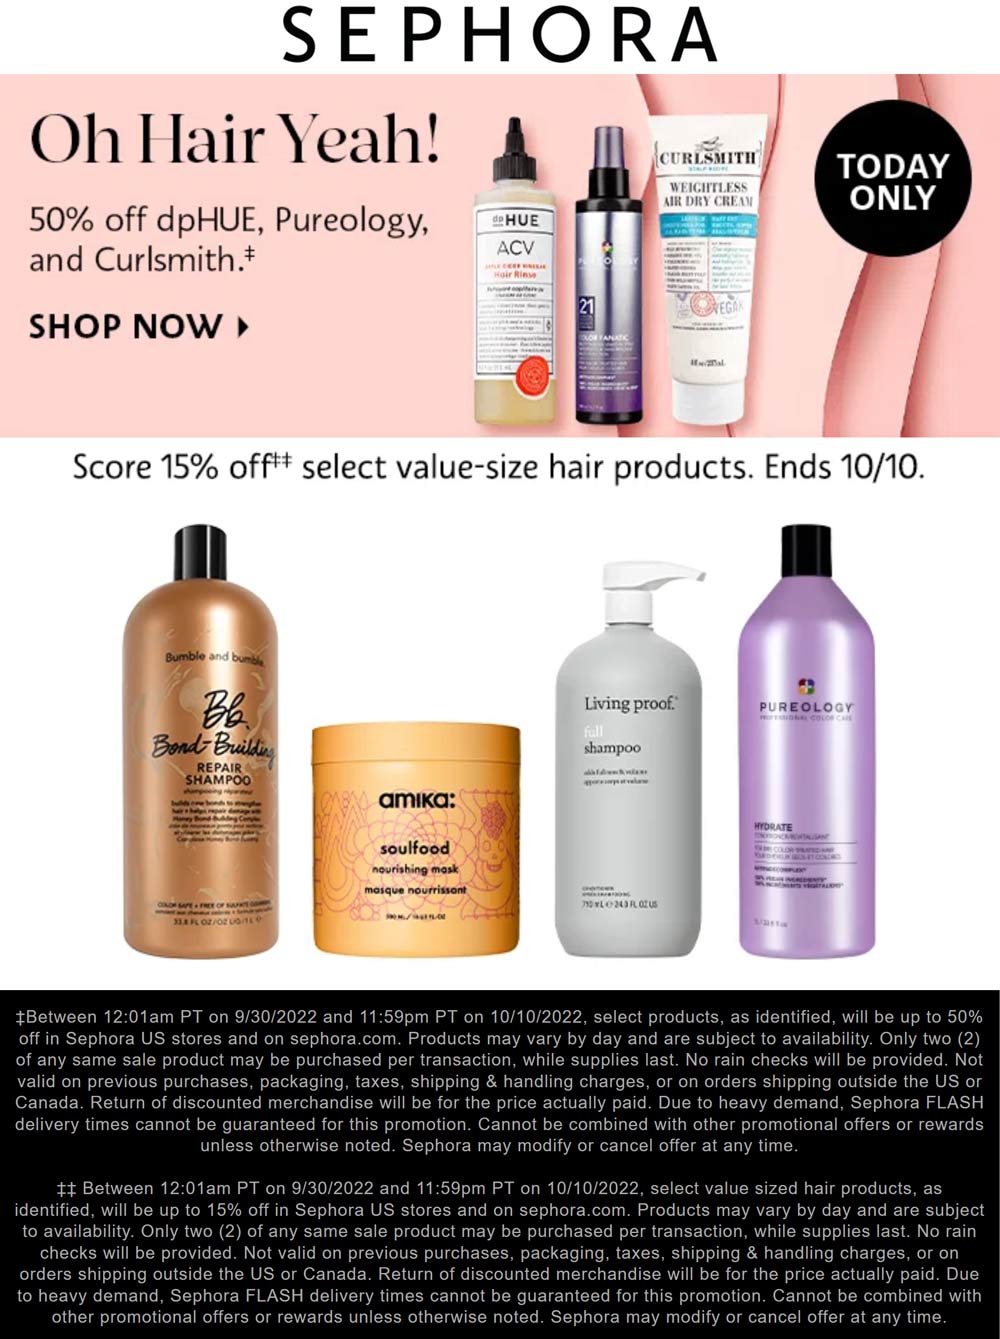 Sephora stores Coupon  50% off dpHUE, Pureology & Curlsmitch today, also 15% off value sized items at Sephora #sephora 